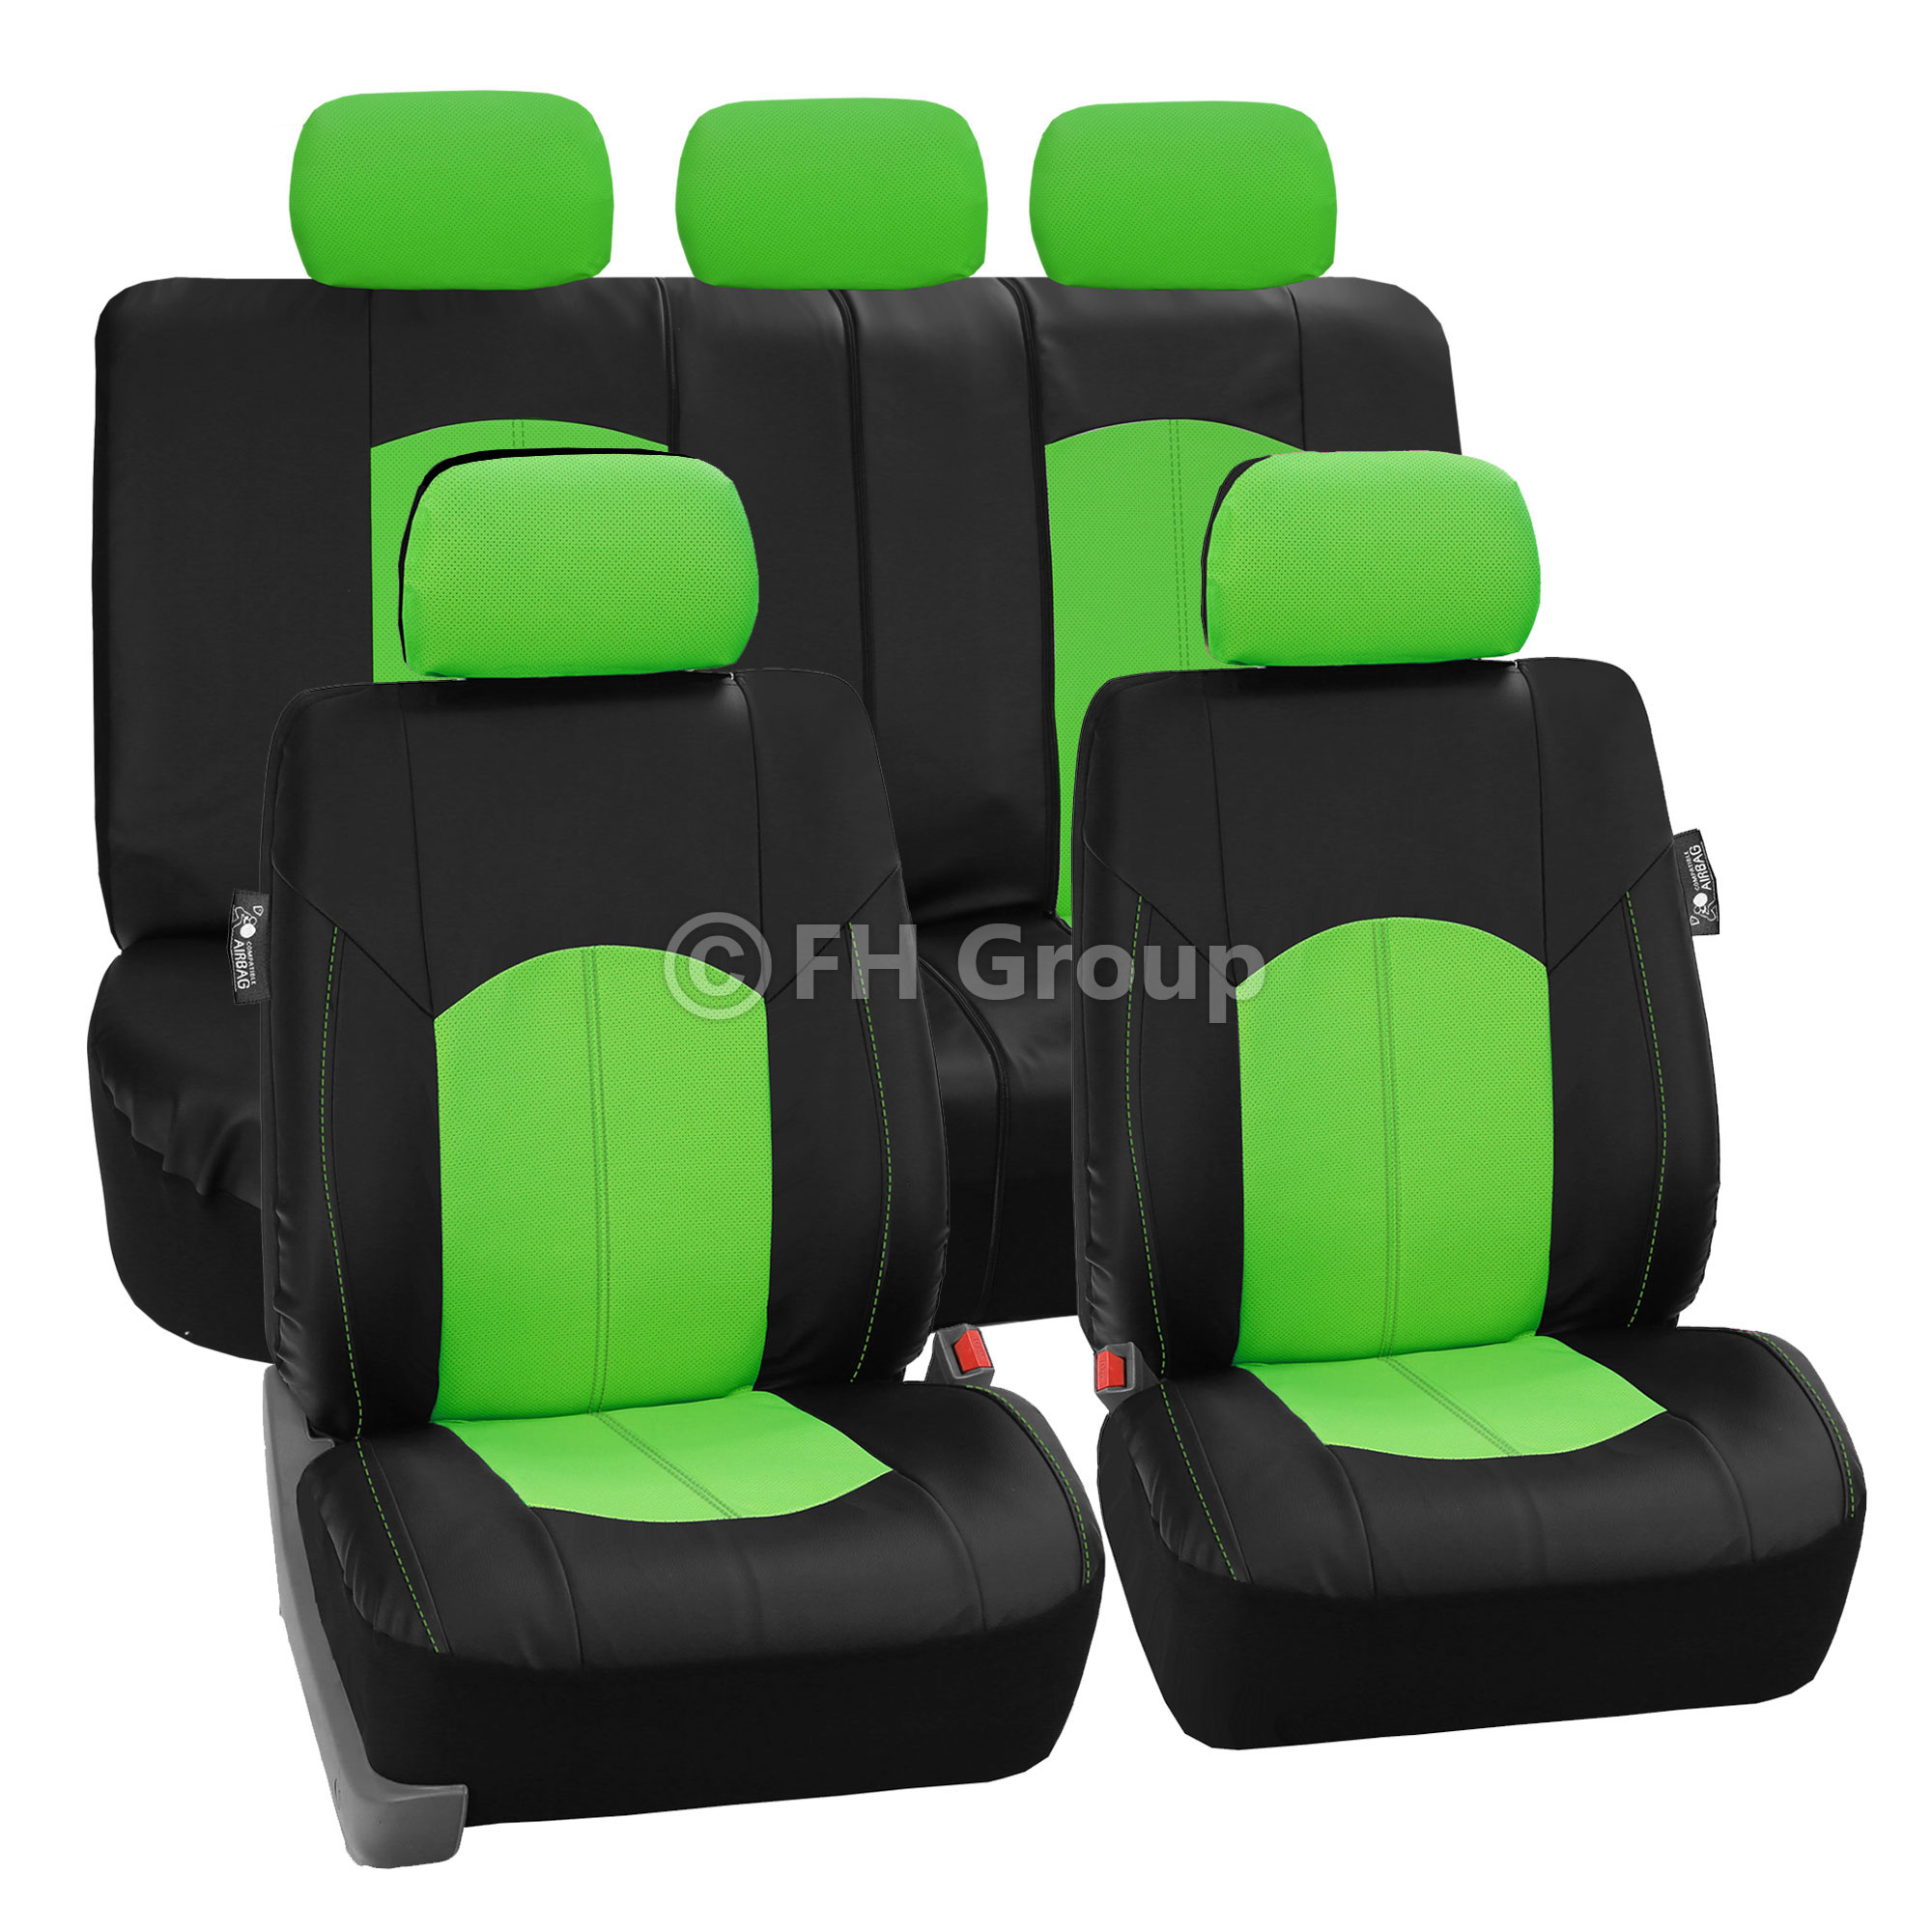 FH Group, Green Black Deluxe Leather Seat Covers Full Set w/ Free Air Freshener, Airbag Compatible / Split Bench Covers - image 4 of 10